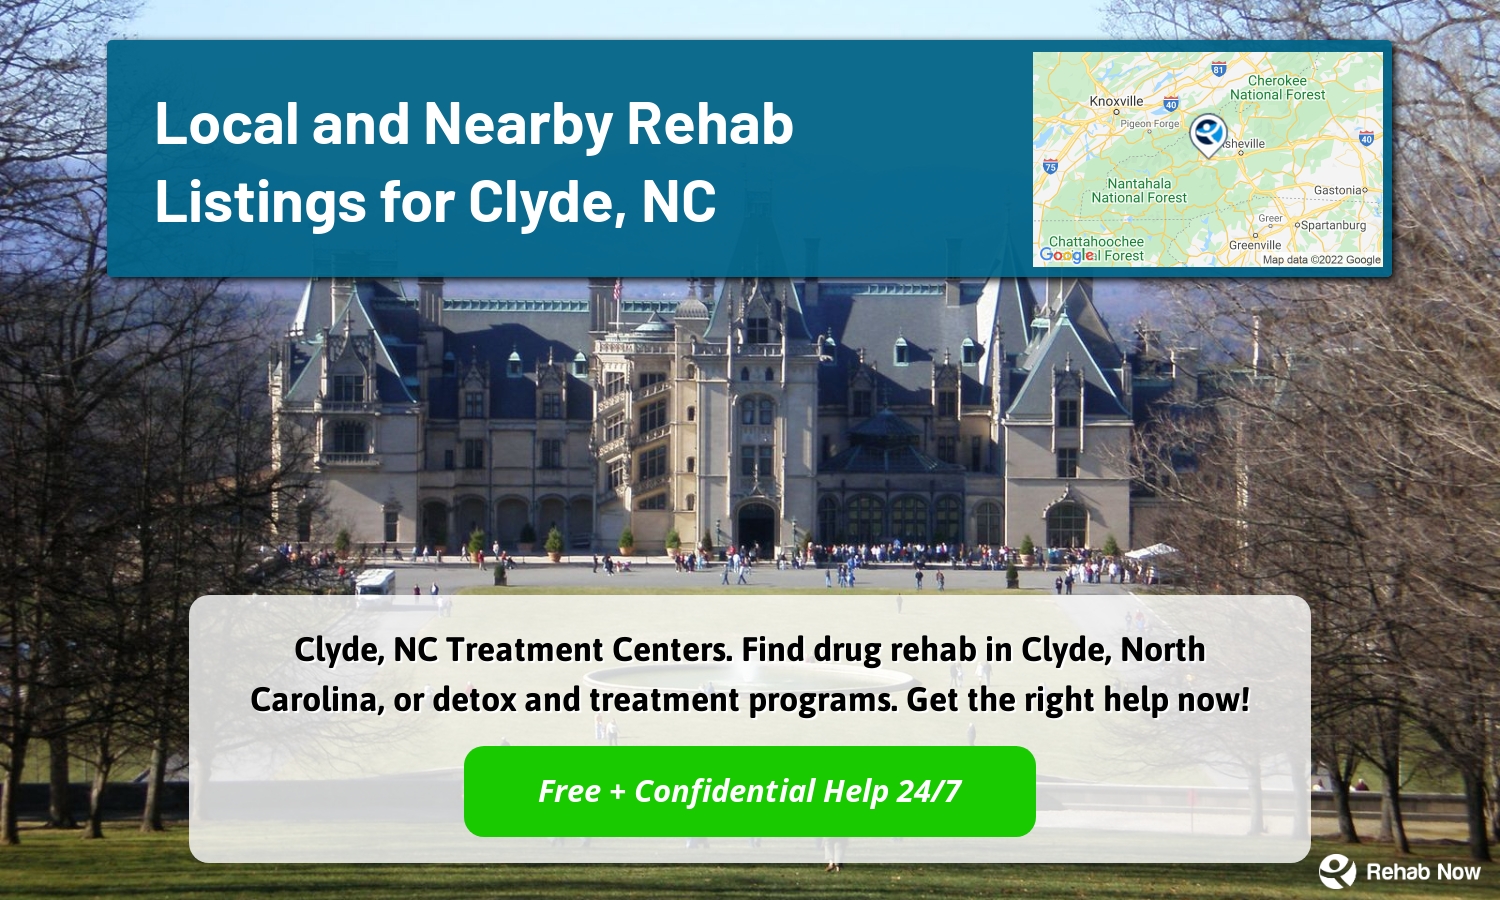 Clyde, NC Treatment Centers. Find drug rehab in Clyde, North Carolina, or detox and treatment programs. Get the right help now!